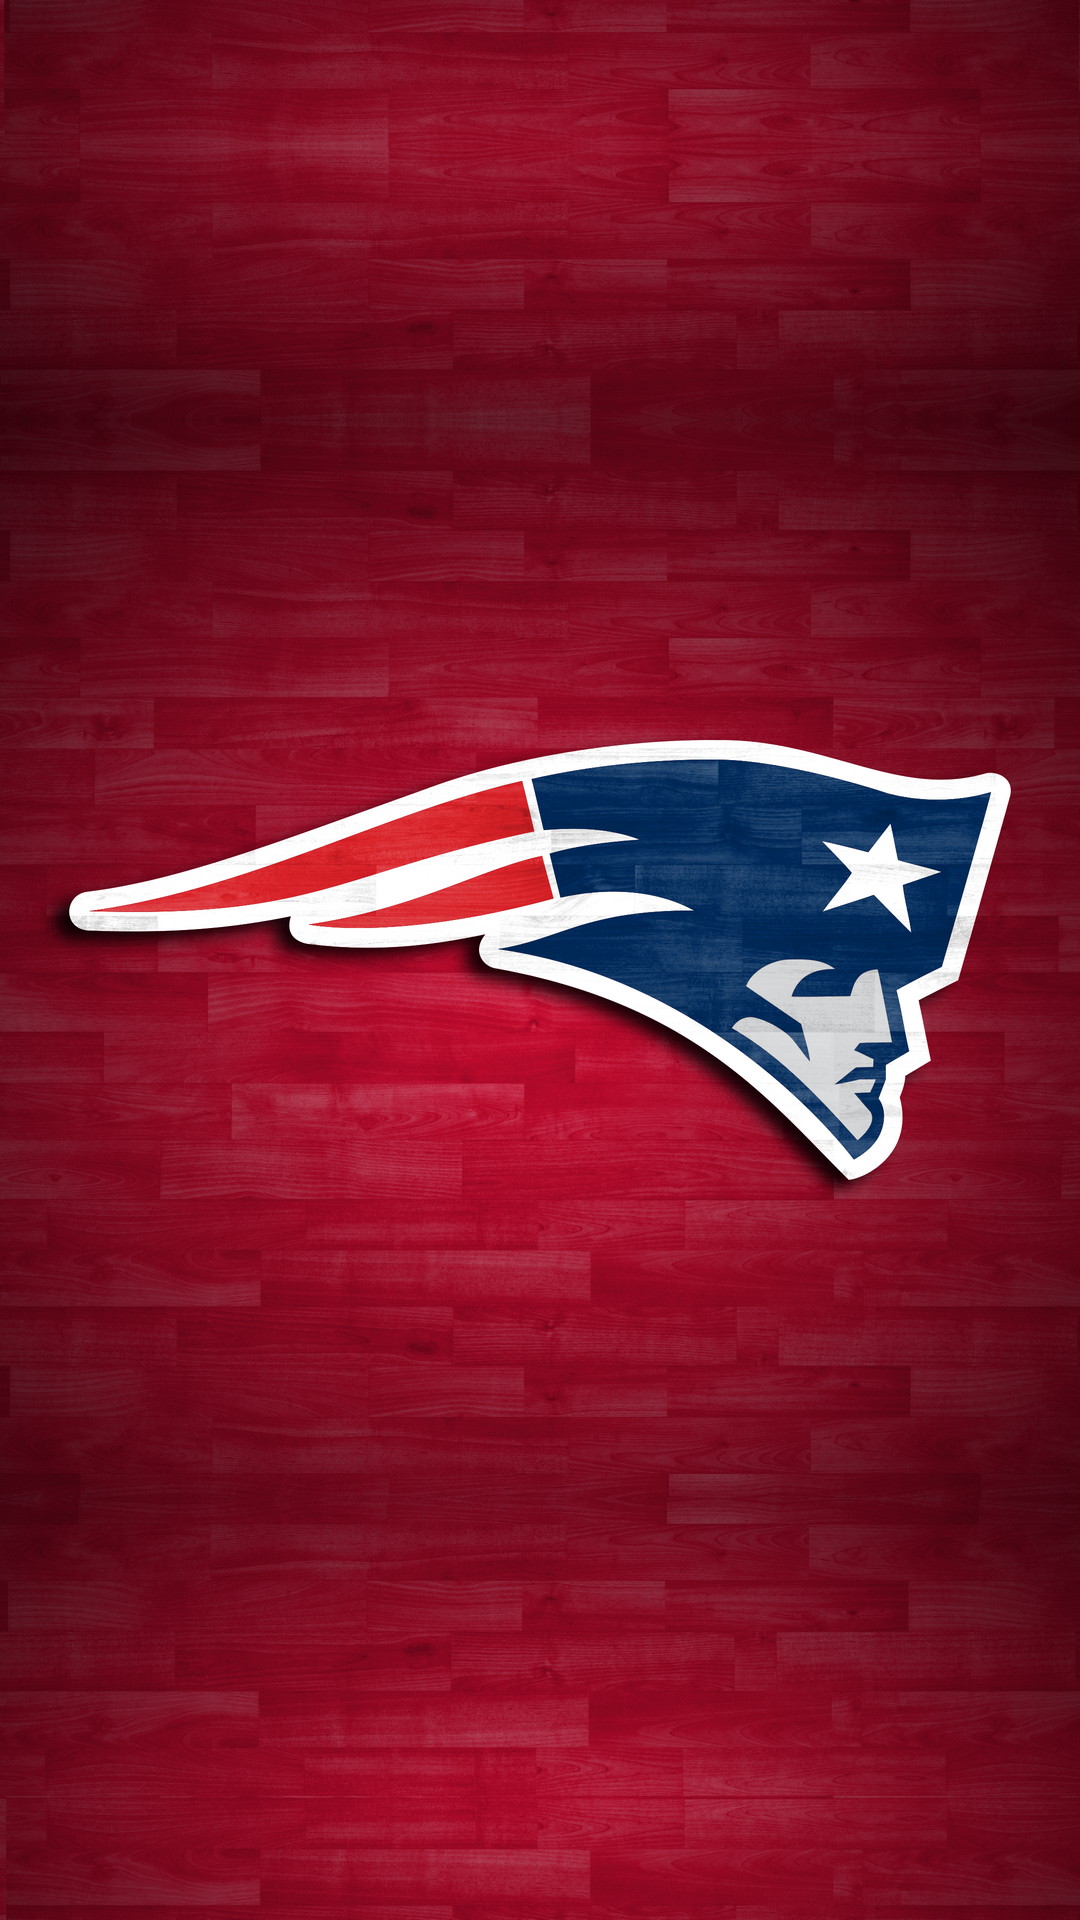 New England Patriots Wallpaper Mobile with high-resolution 1080x1920 pixel. You can use and set as wallpaper for Notebook Screensavers, Mac Wallpapers, Mobile Home Screen, iPhone or Android Phones Lock Screen